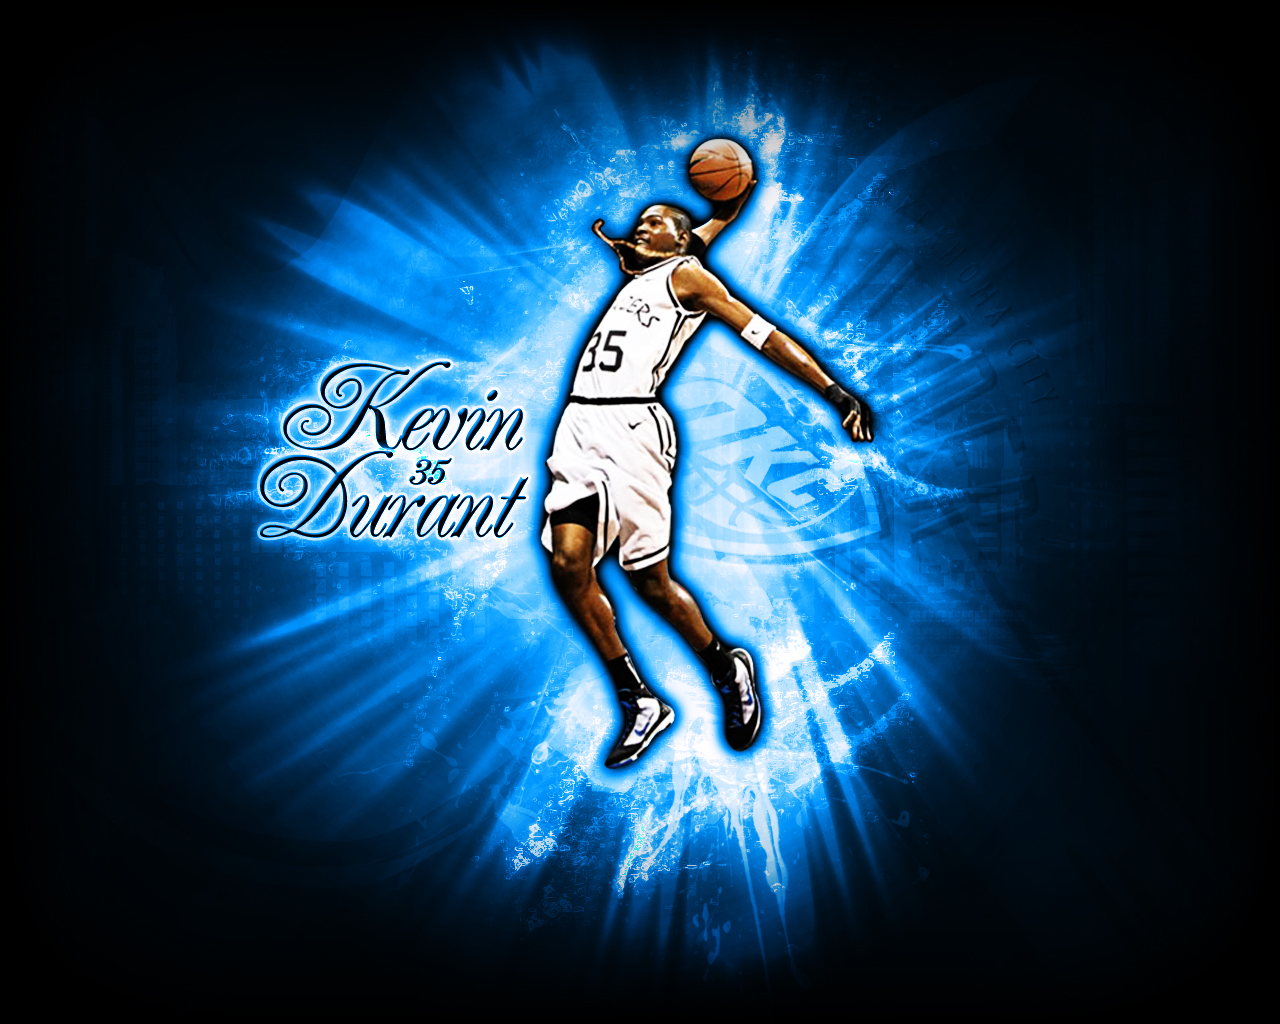 Kevin Durant Wallpaper by OKC Thunder on